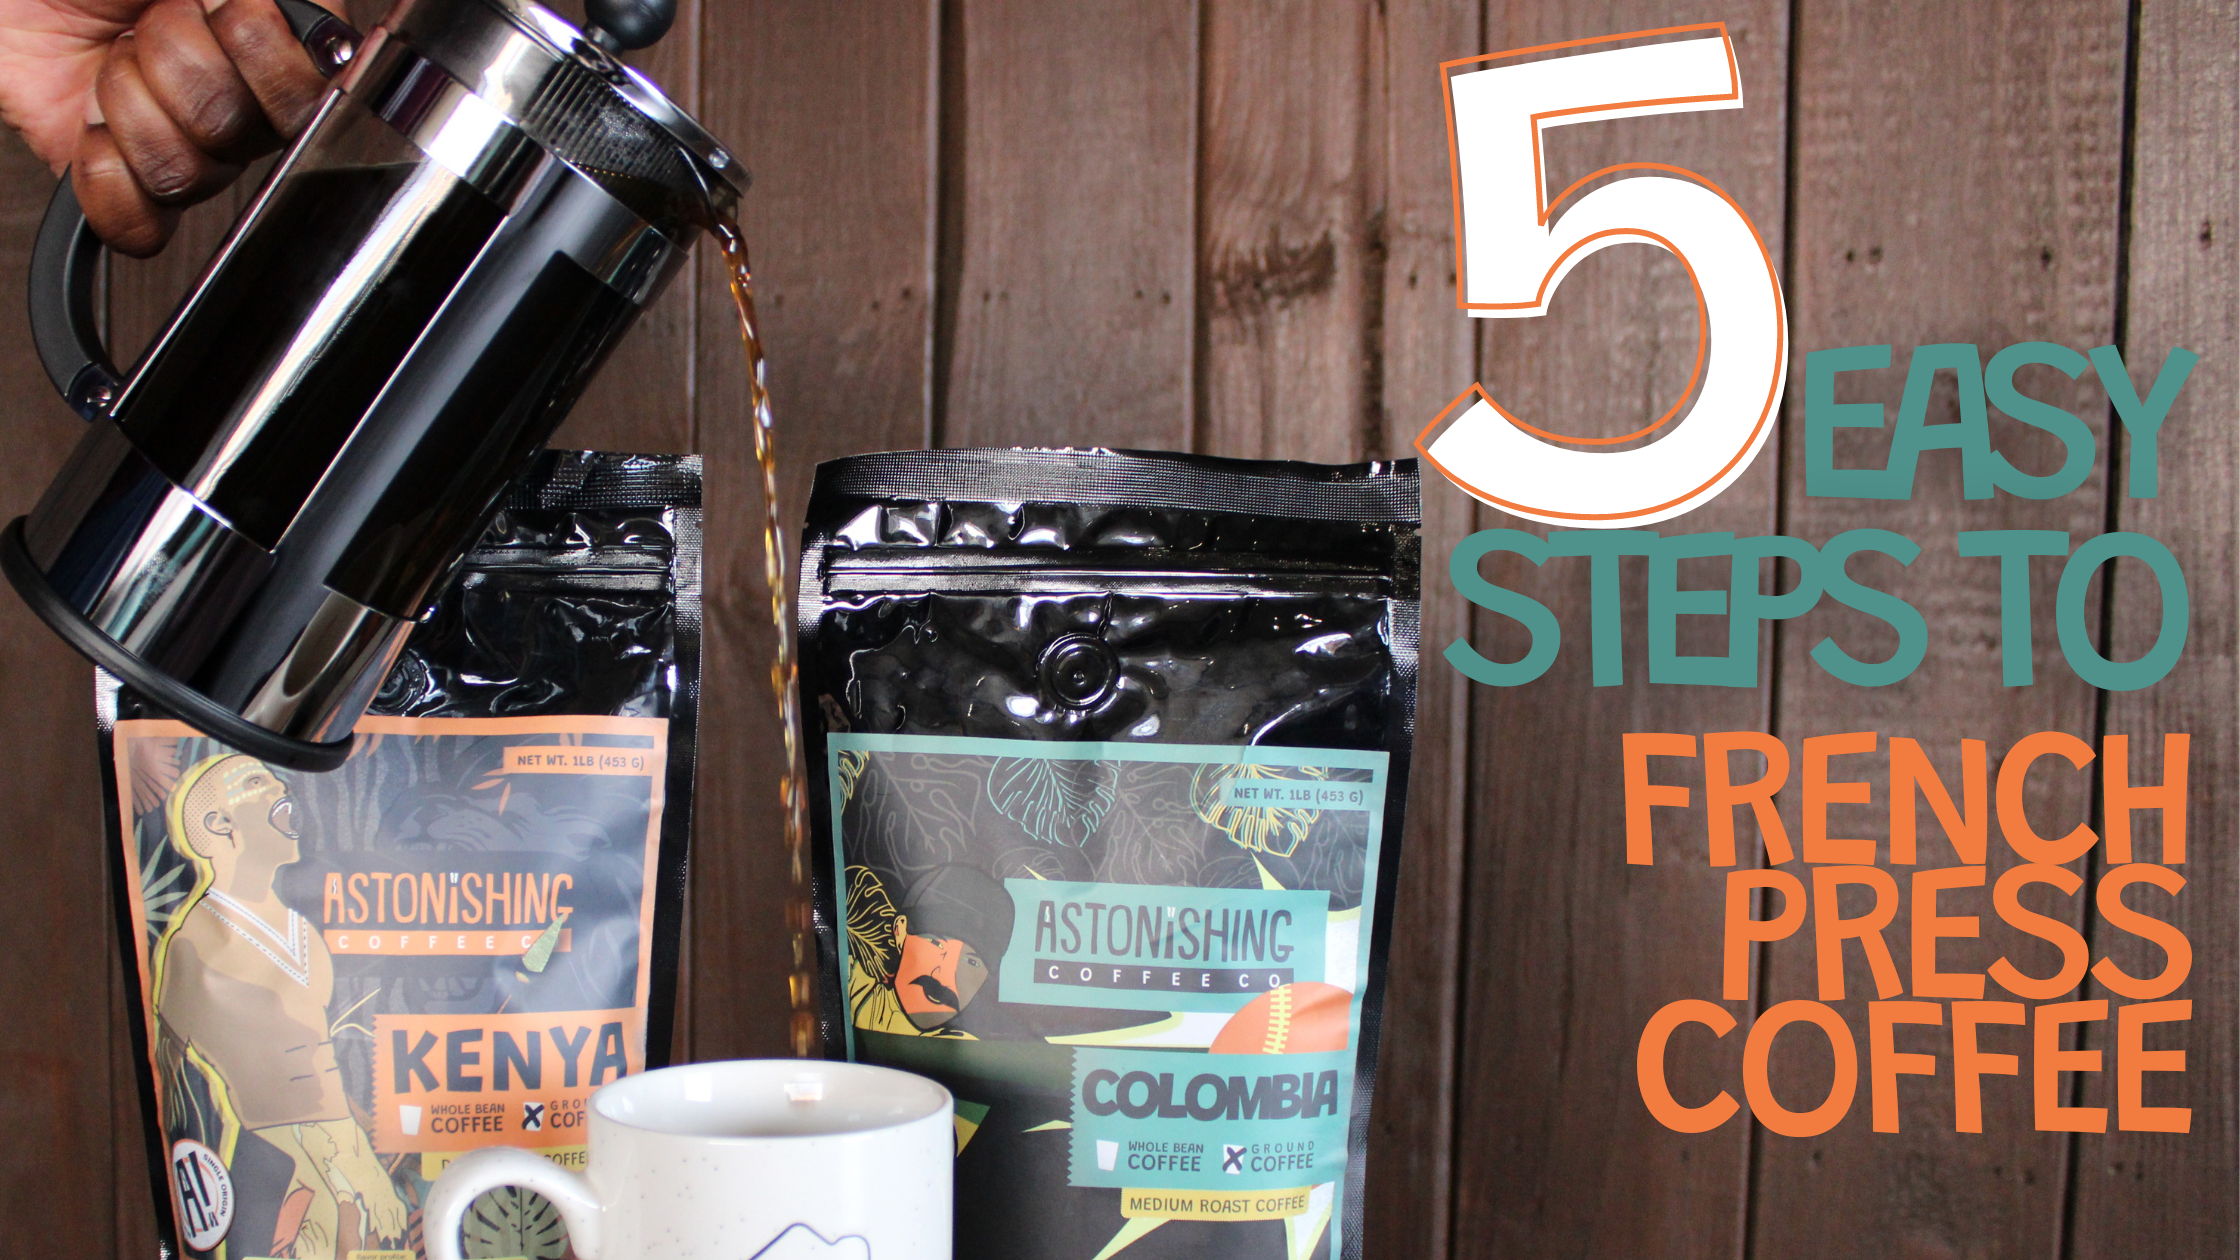 How to make coffee: 5 ways to make the best coffee - TODAY